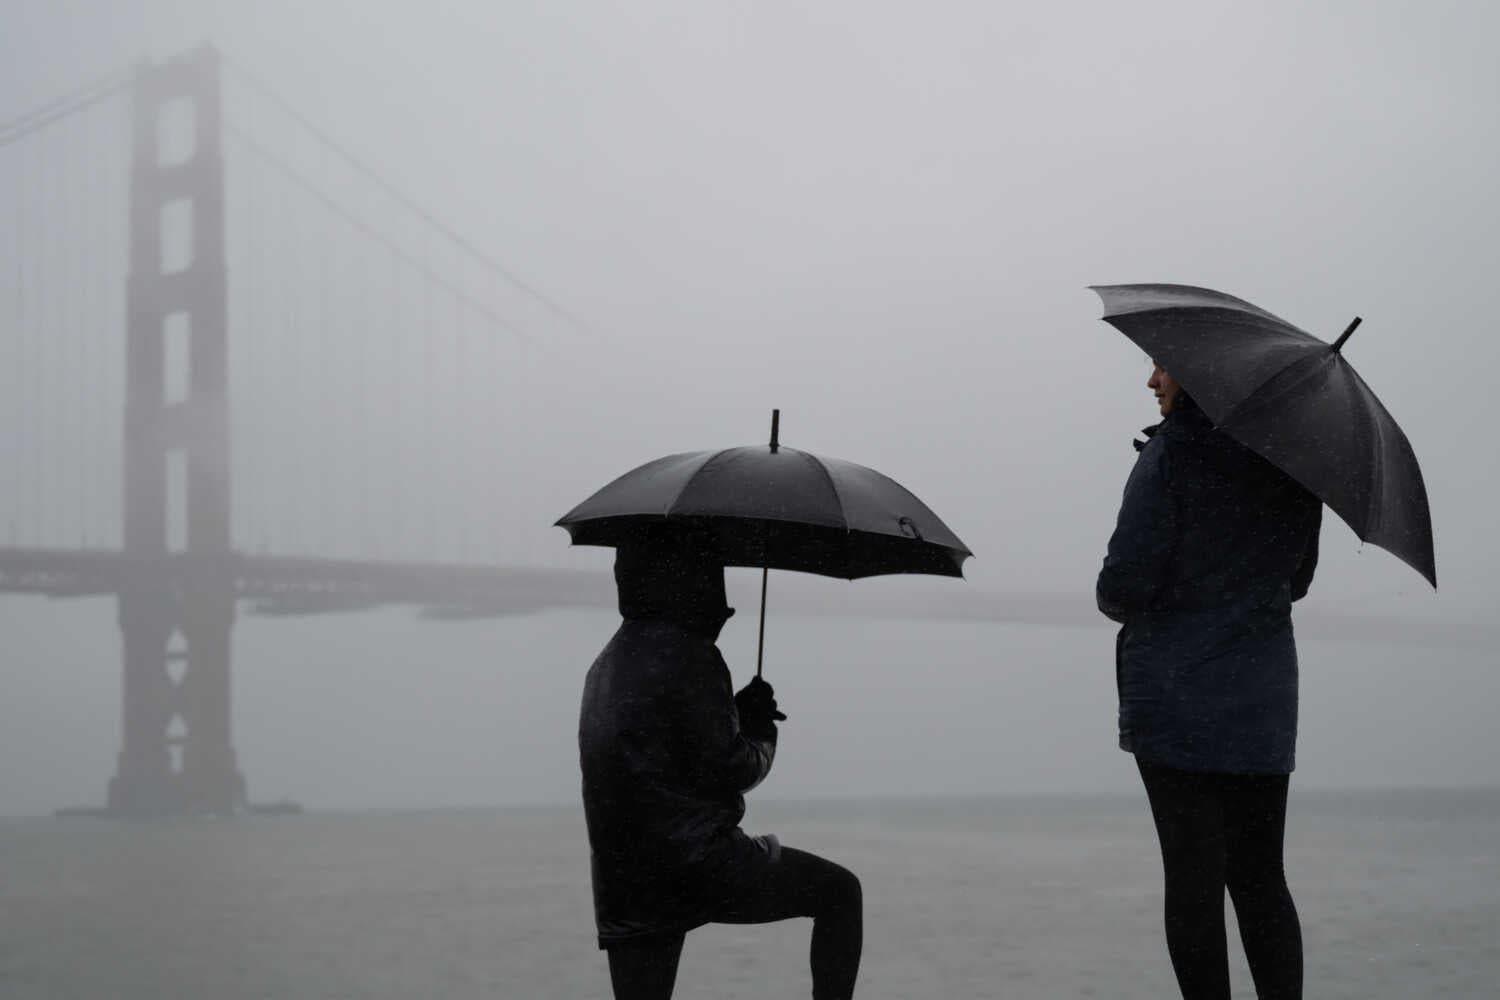 Two people, seen from behind and mostly in silhouettes, dressed in rain gear and holding umbrellas. In the distance, a large suspension bridge looms in the fog.